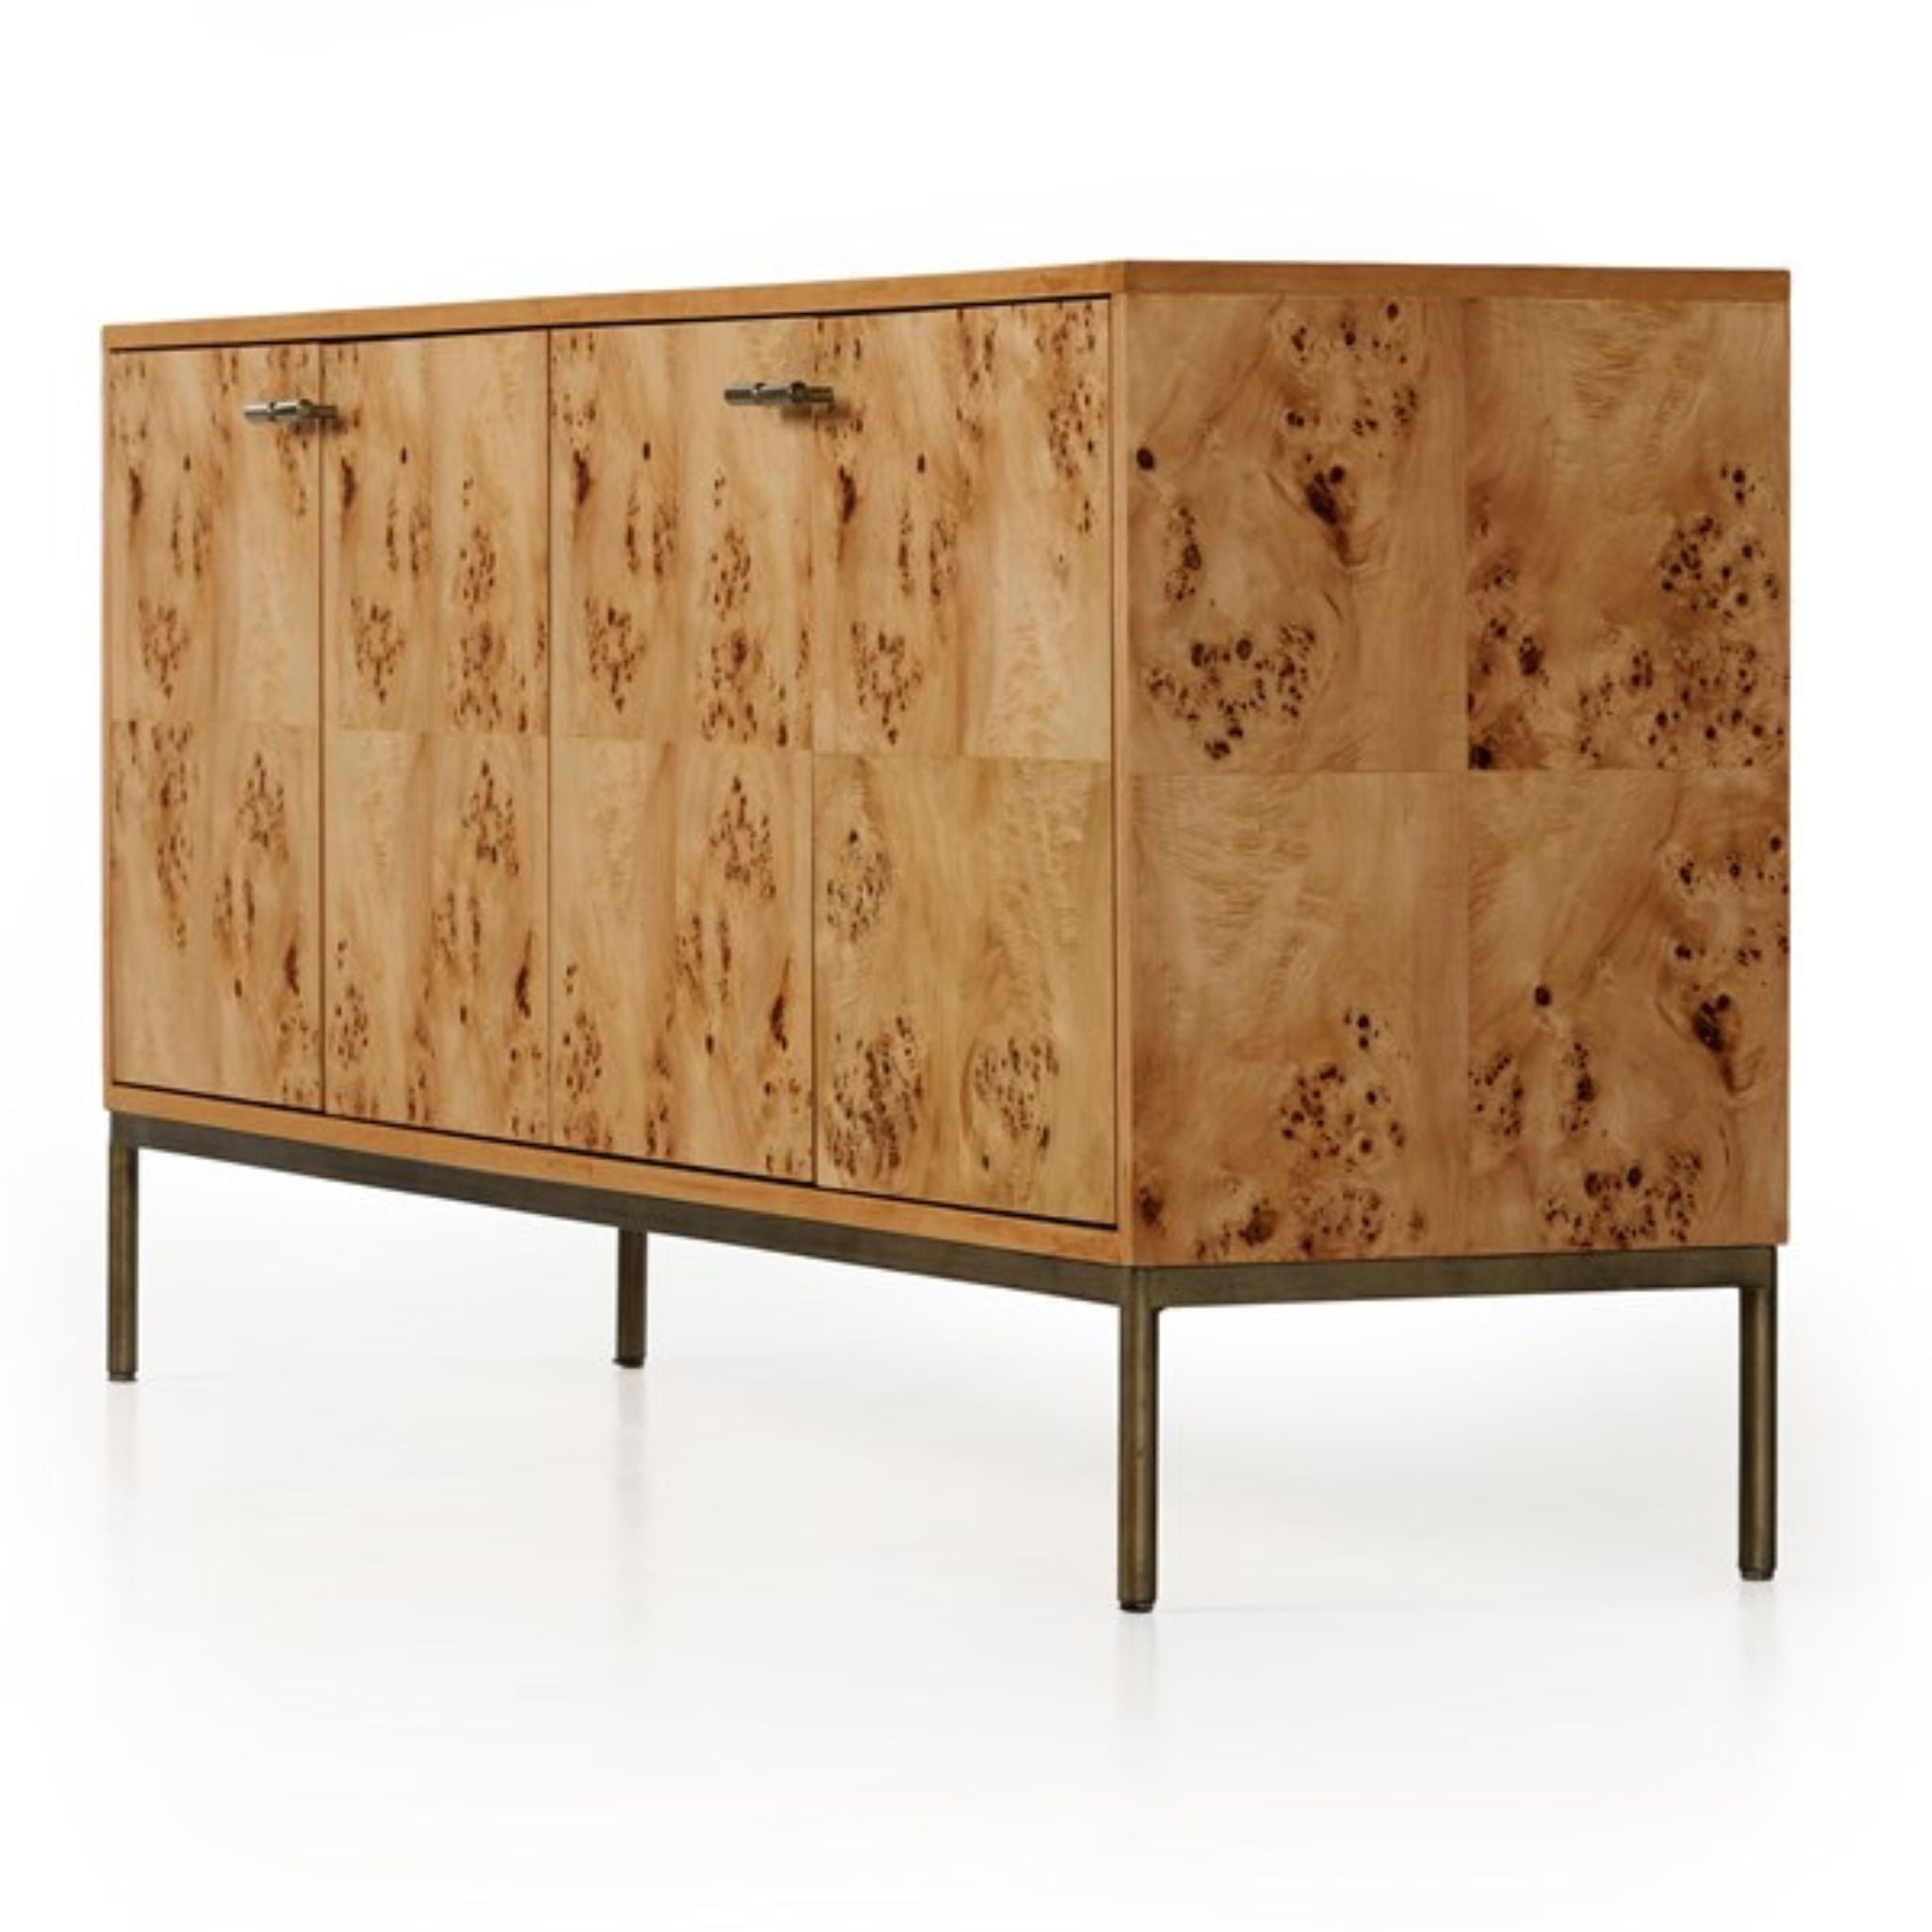 MITZIE SIDEBOARD - Simply Elevated Home Furnishings 